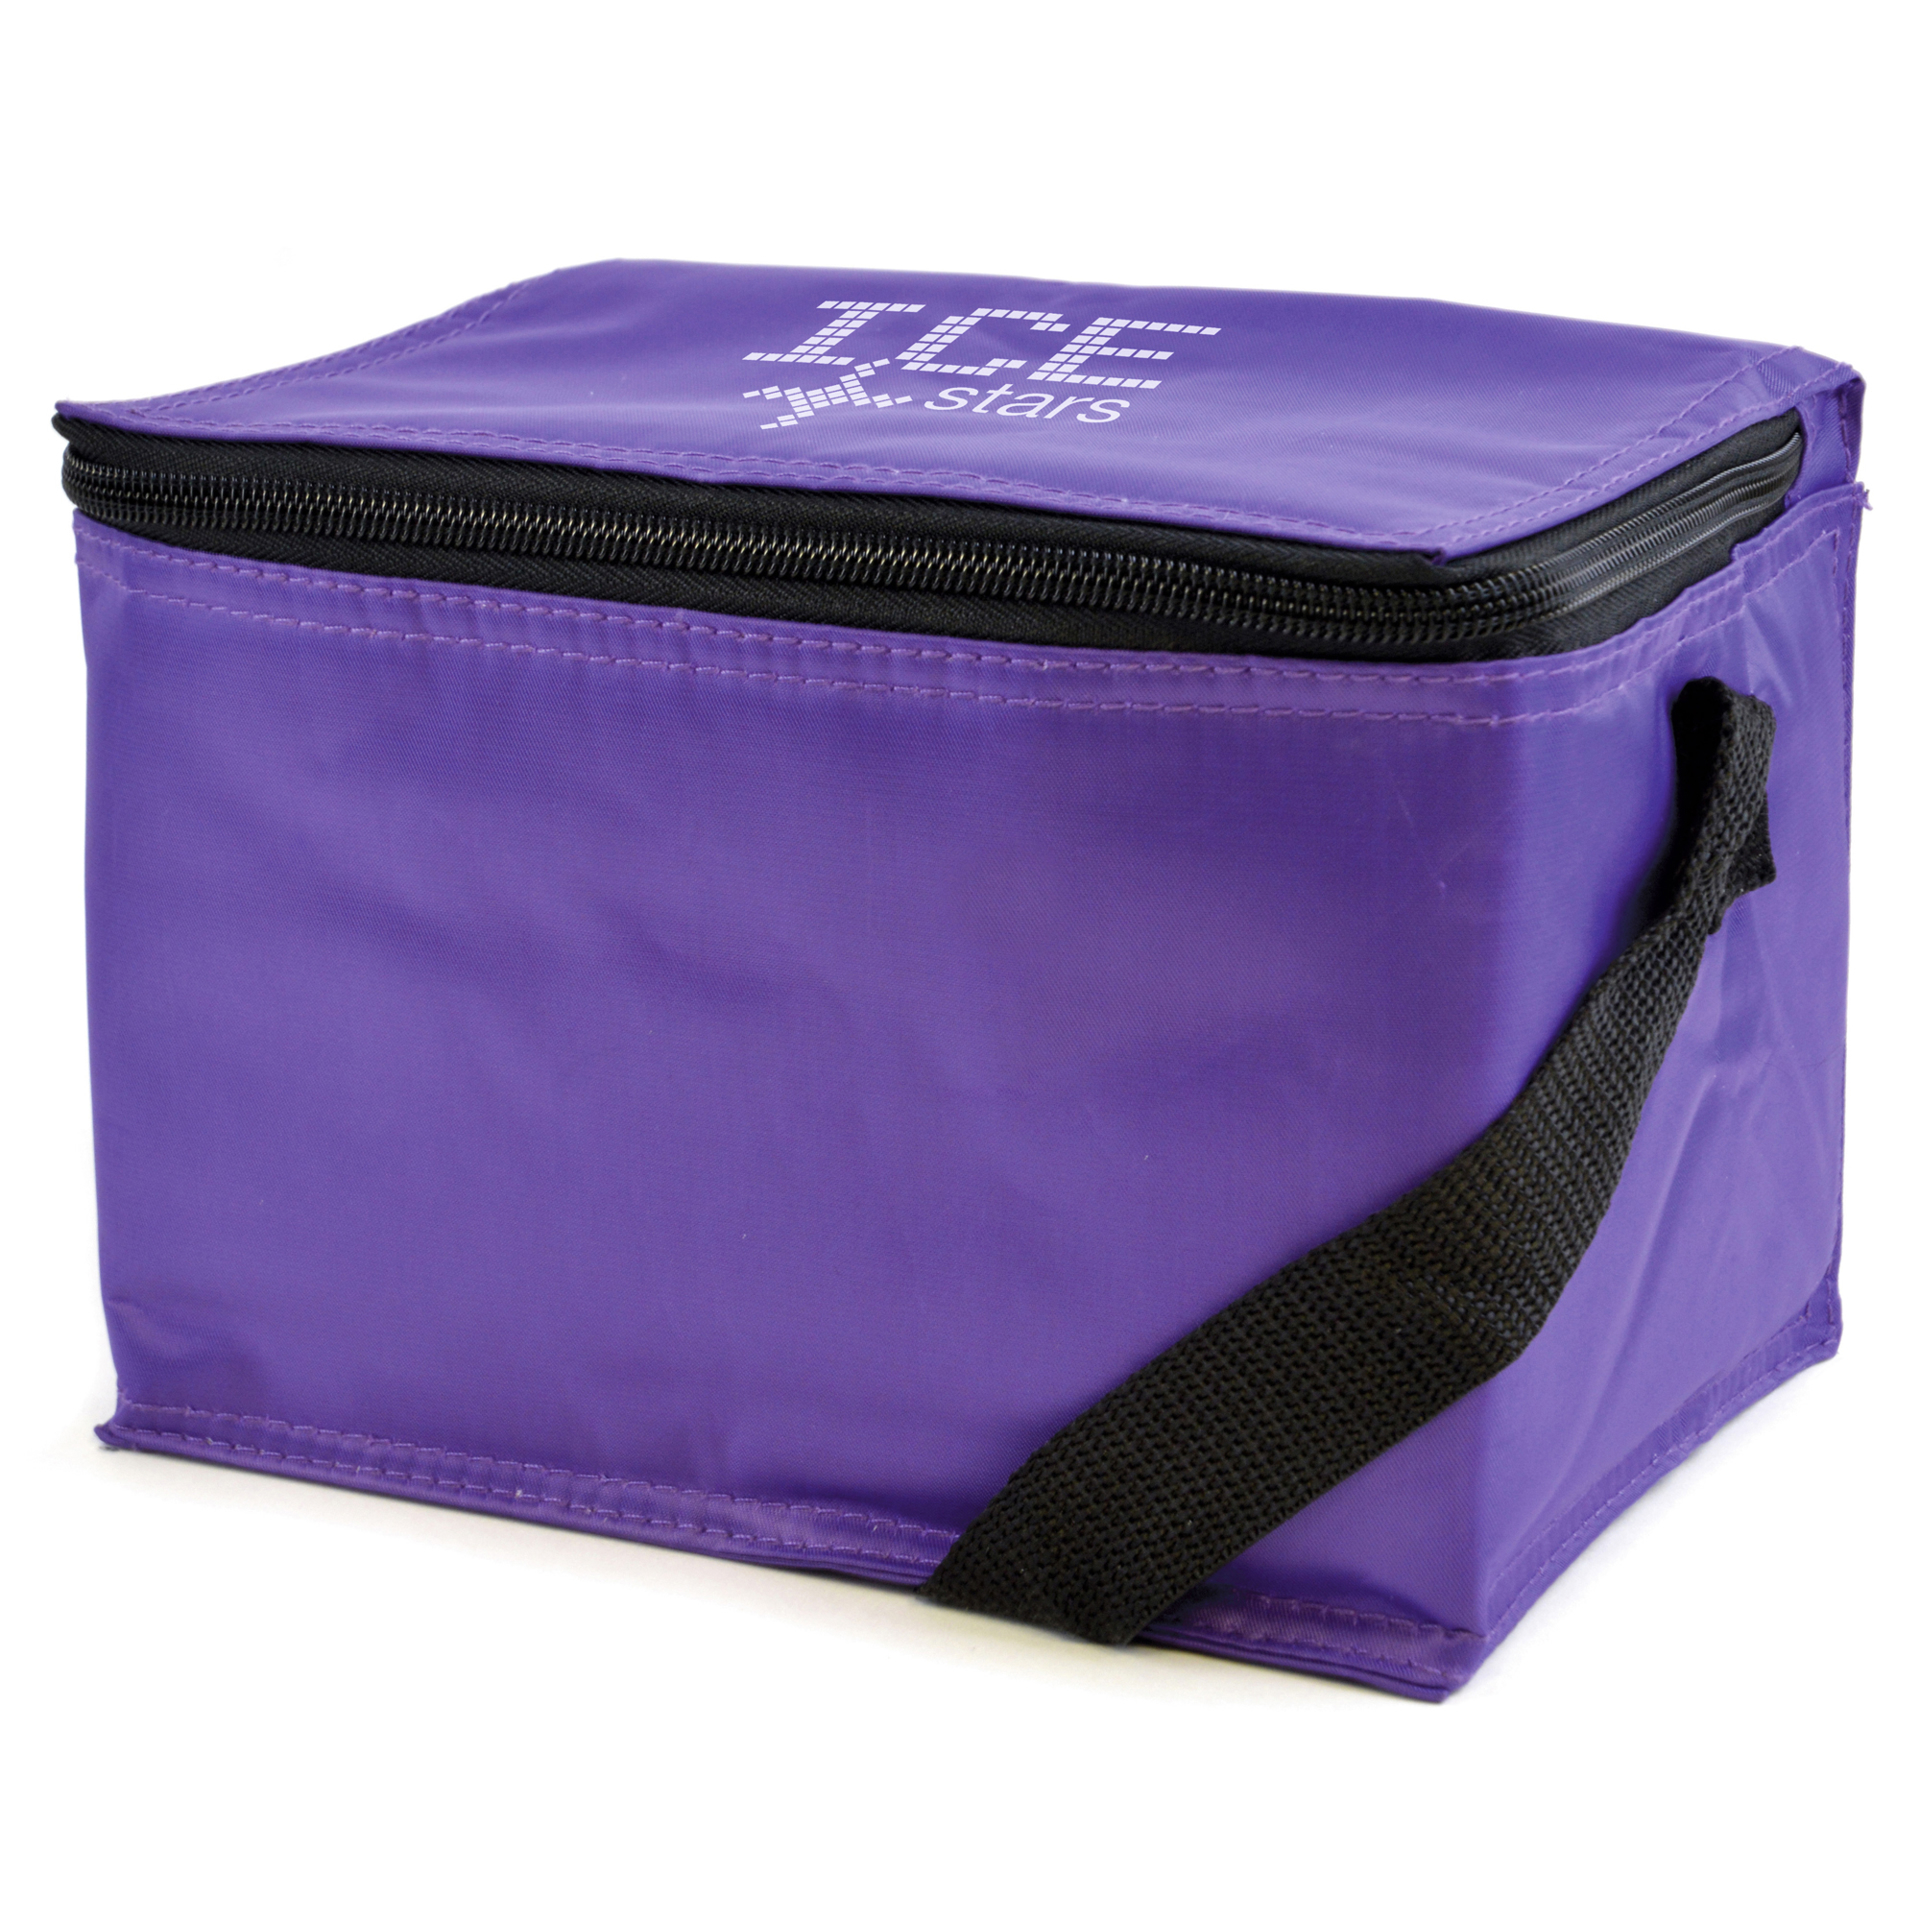 Griffin Cooler Bag in purple with 1 colour print logo